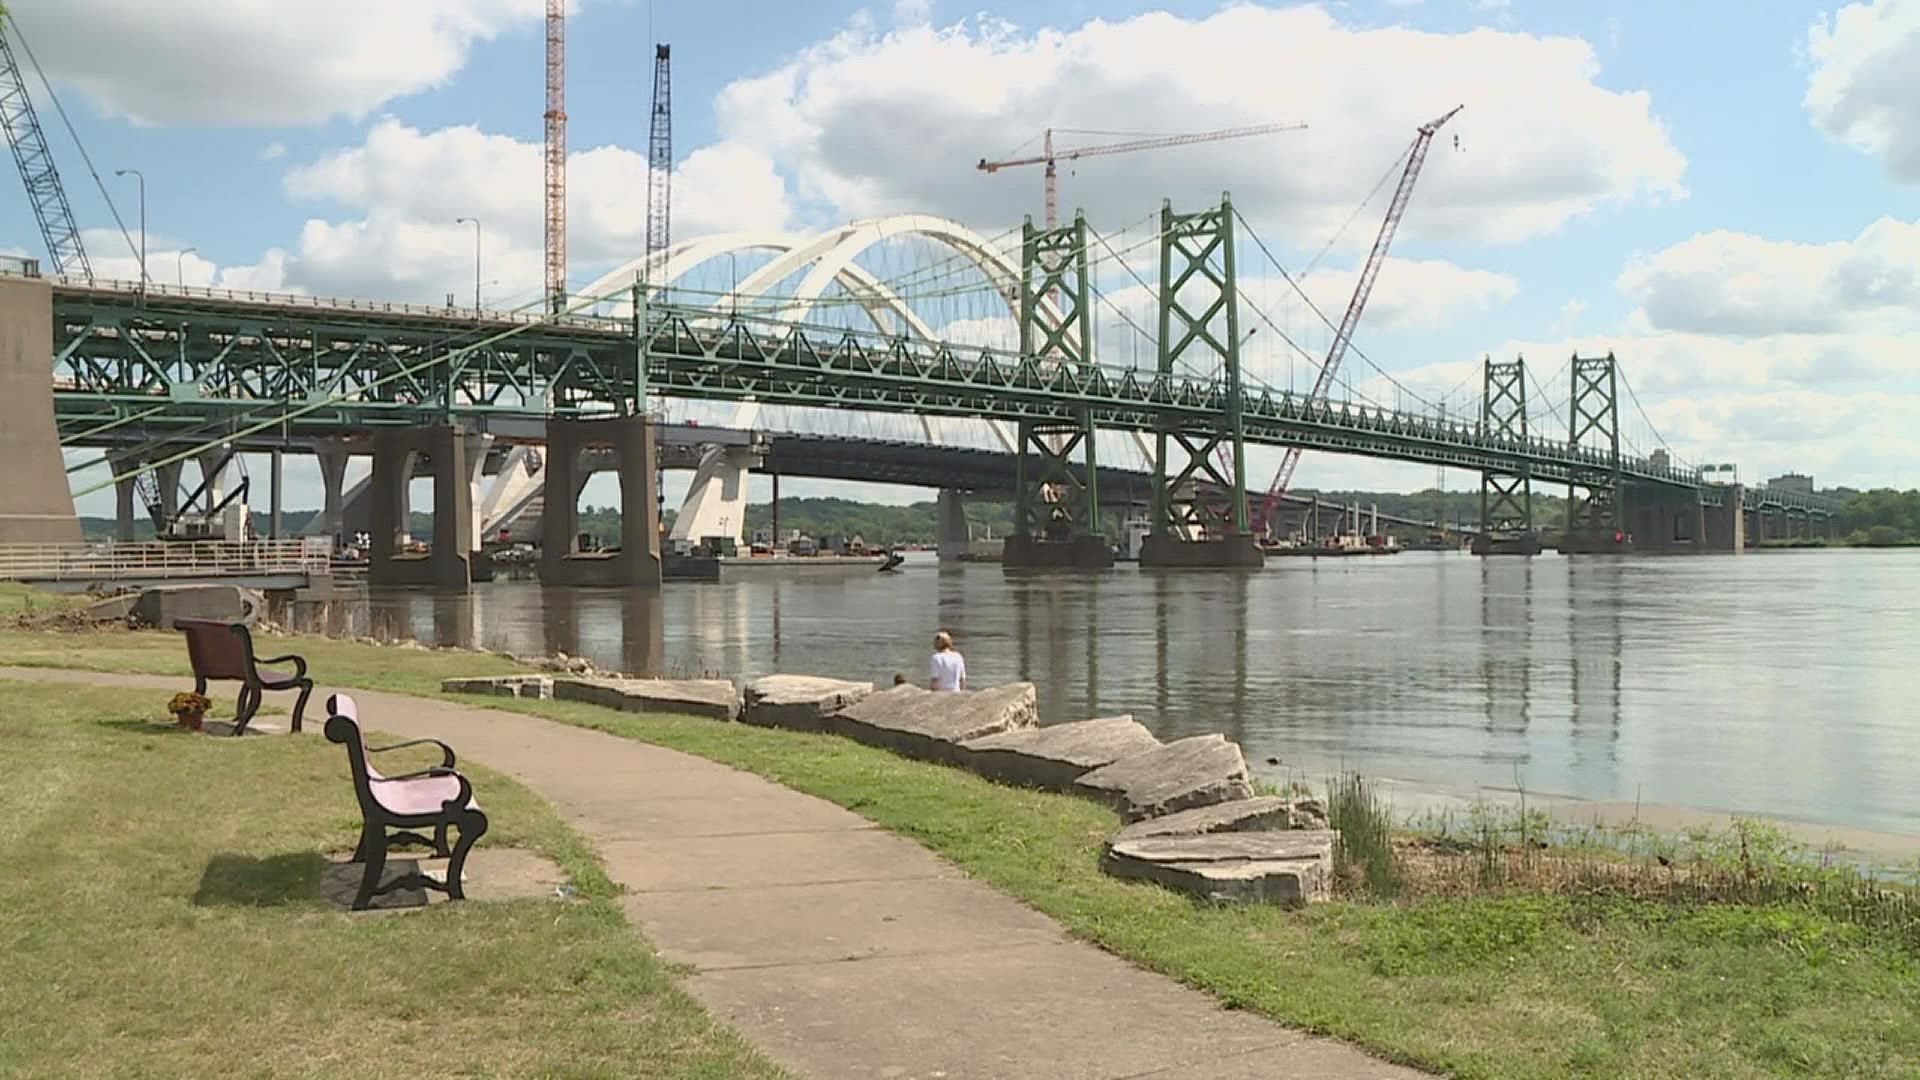 With old I-74 Bridge meeting the end of its life, the Quad City is offering a new 5K route that lets runners cross the bridge for the first and/or last time.